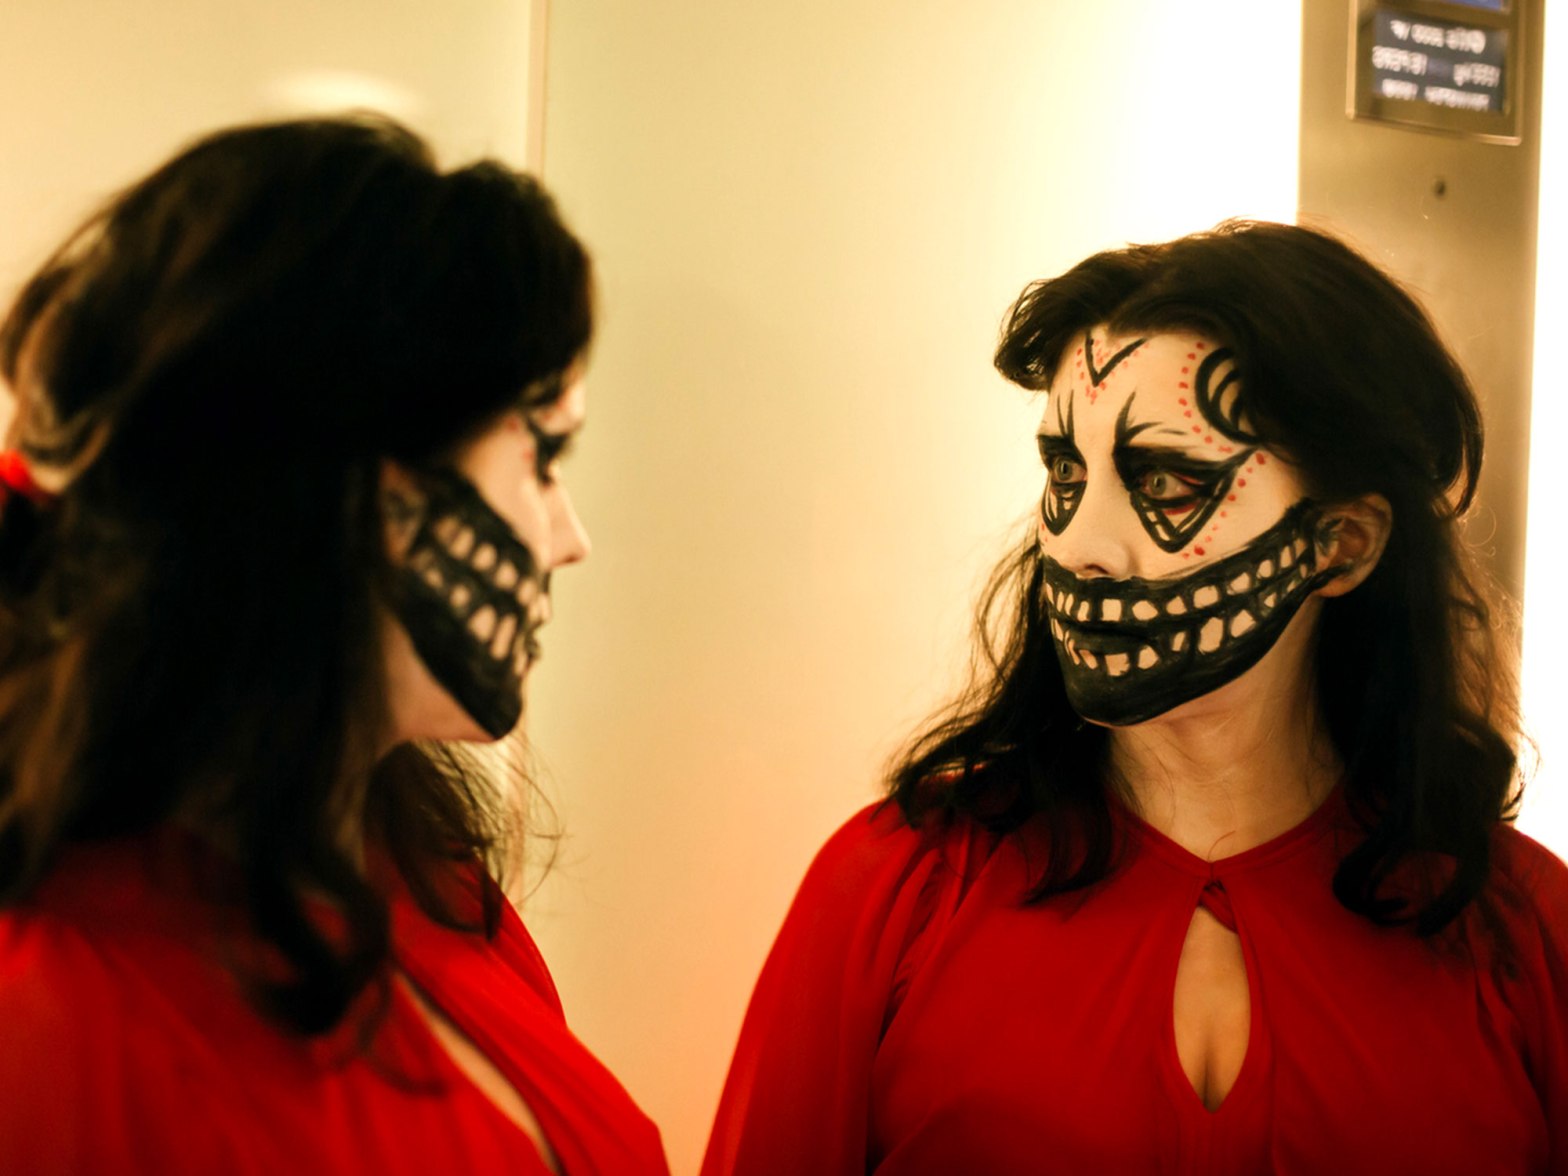 A woman wearing a red dress and skull face-paint, looks at herself in the mirror.